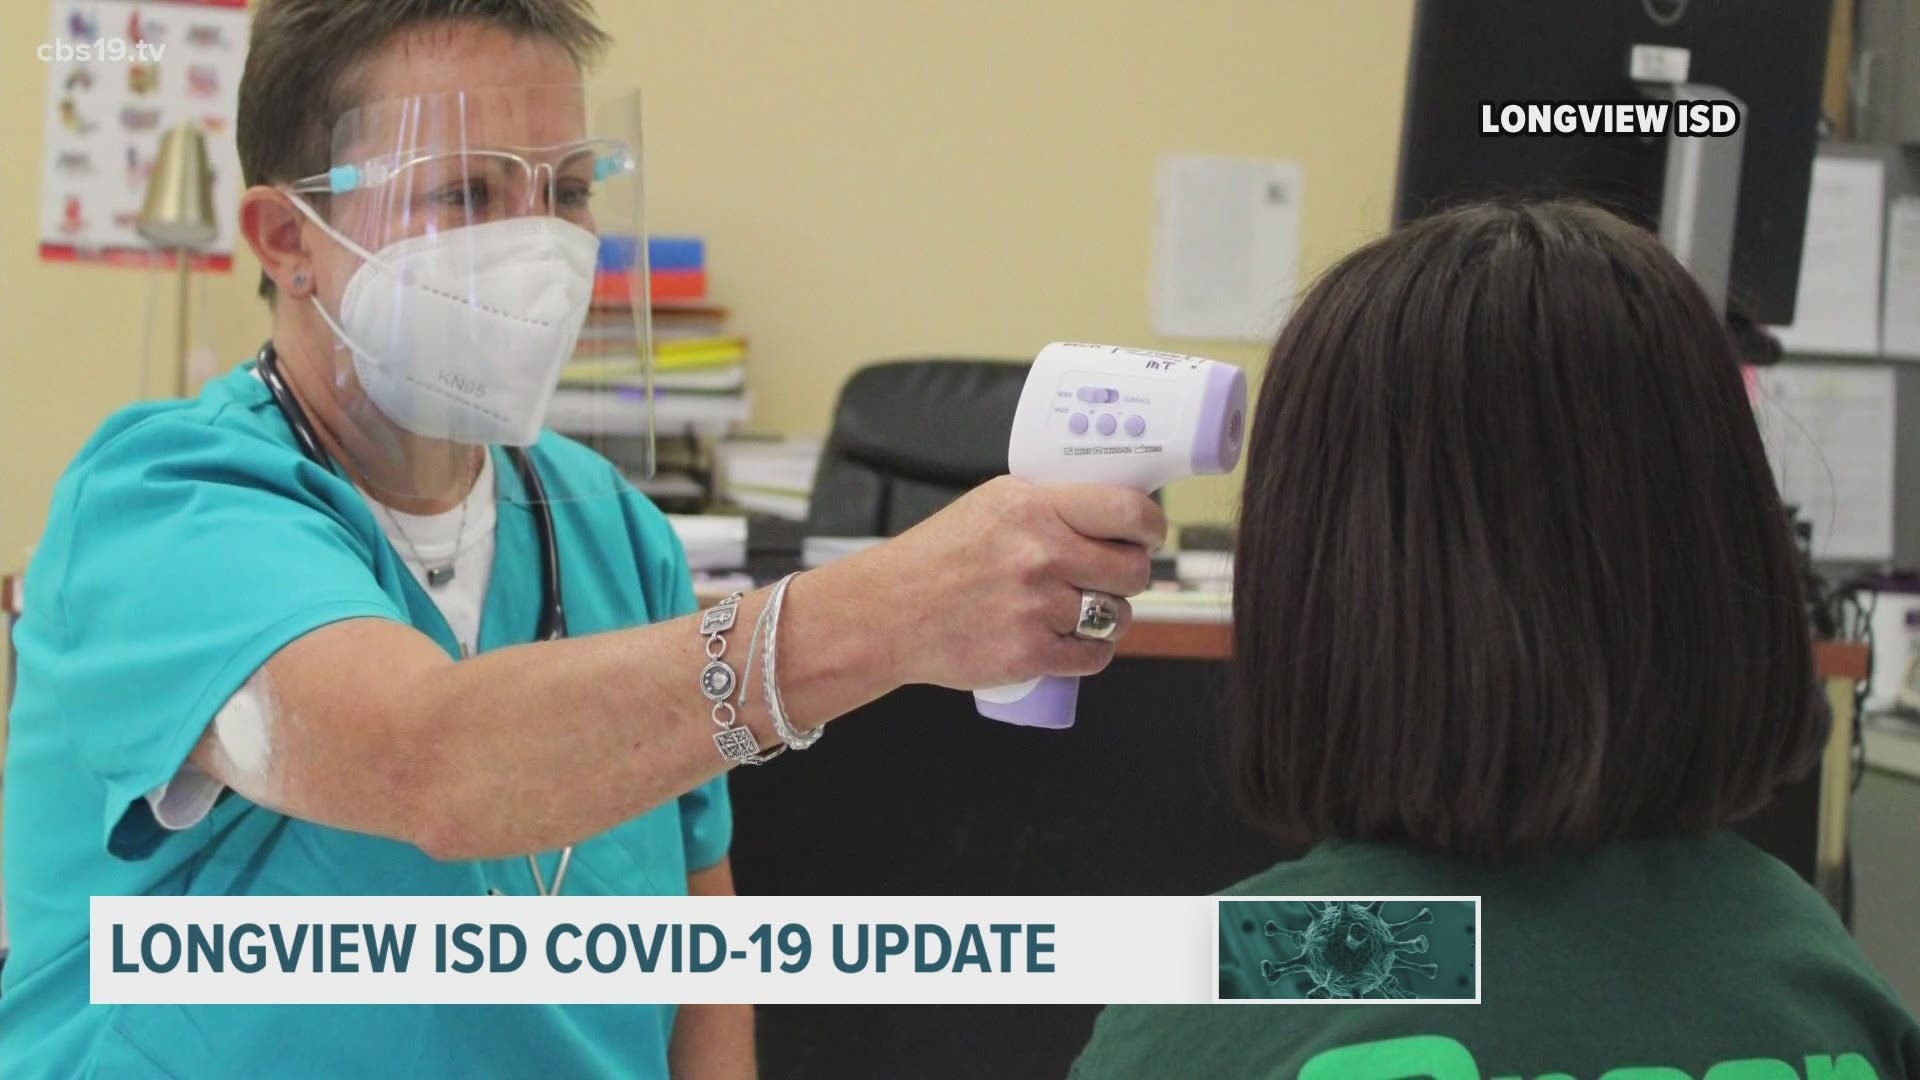 Longview Independent School District provides an update on COVID-19 confirmed cases and staff vaccinations.